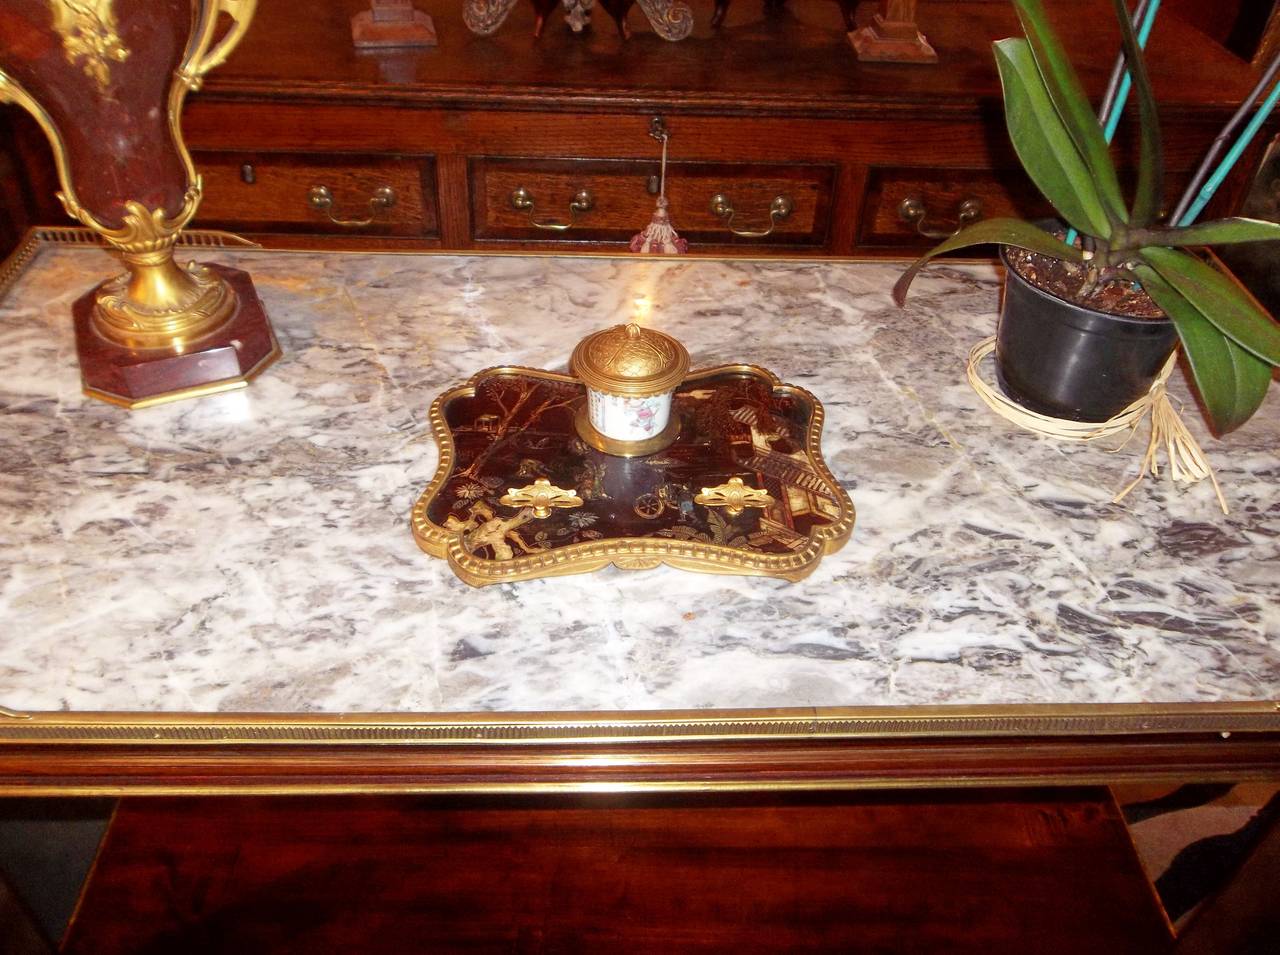 Louis XVI Transition to Directoire Styled Marble-Top Console or Dessert 1